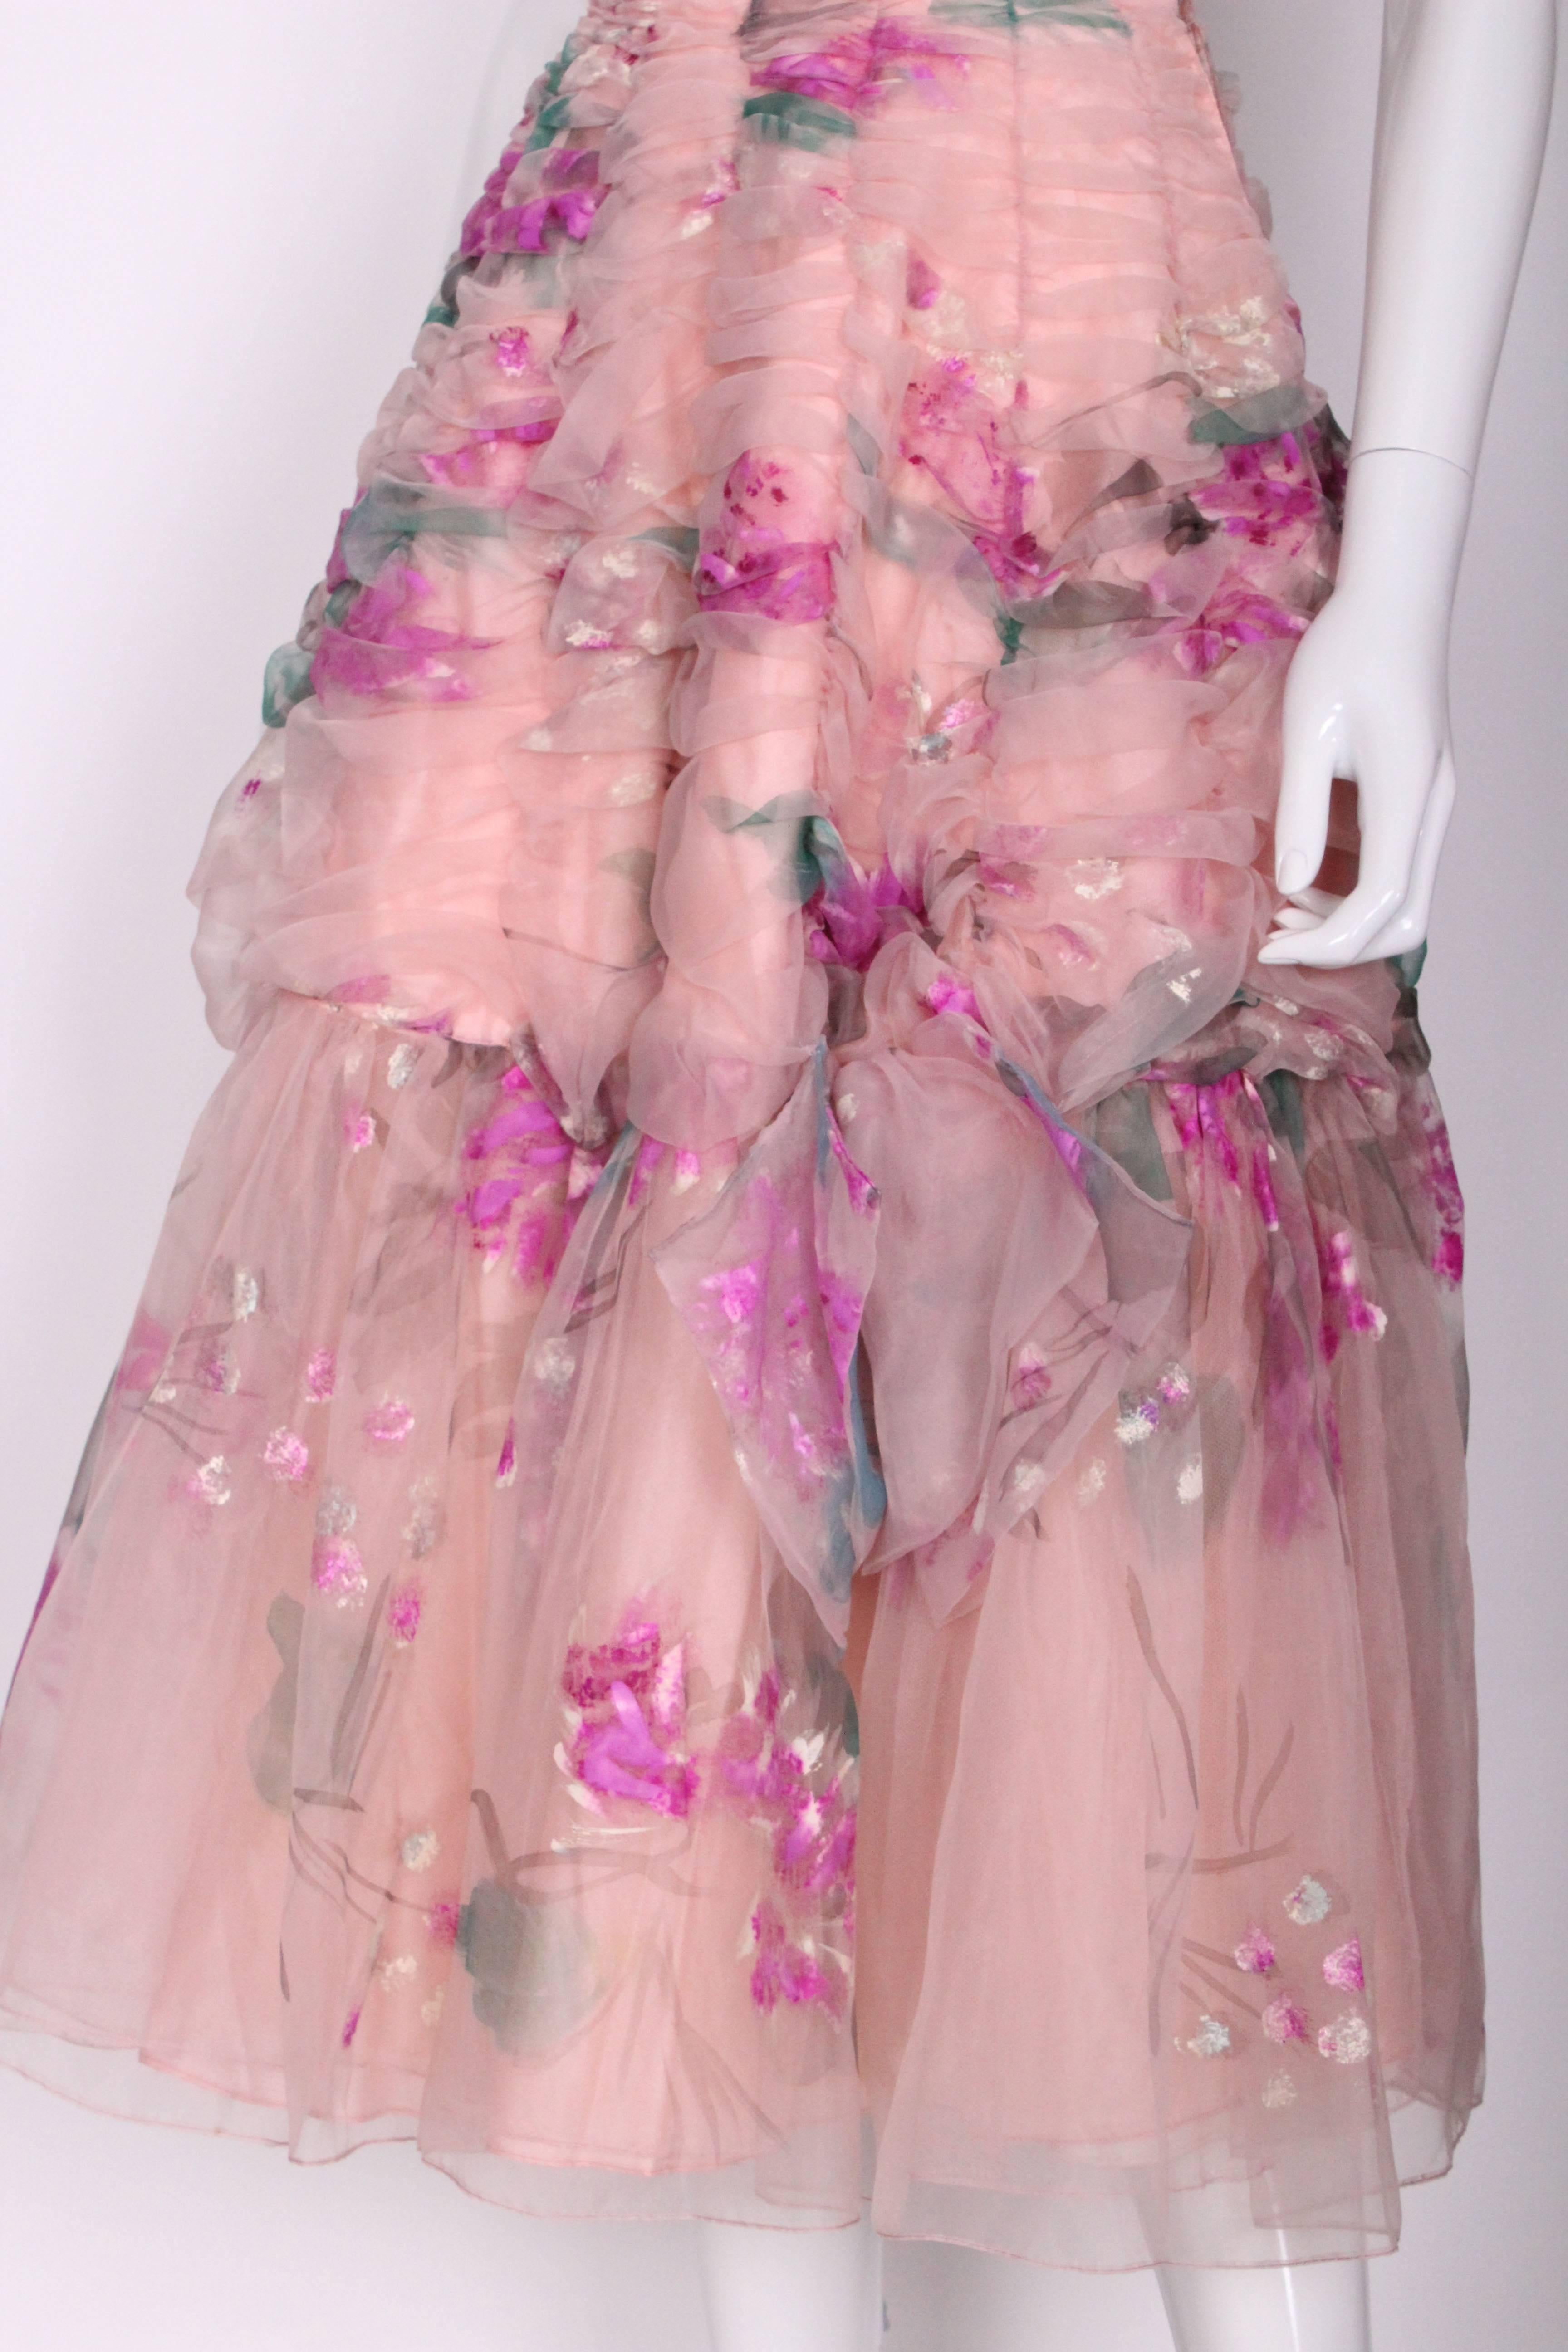 Women's 1950 Handpainted Floral Pink Party Dress